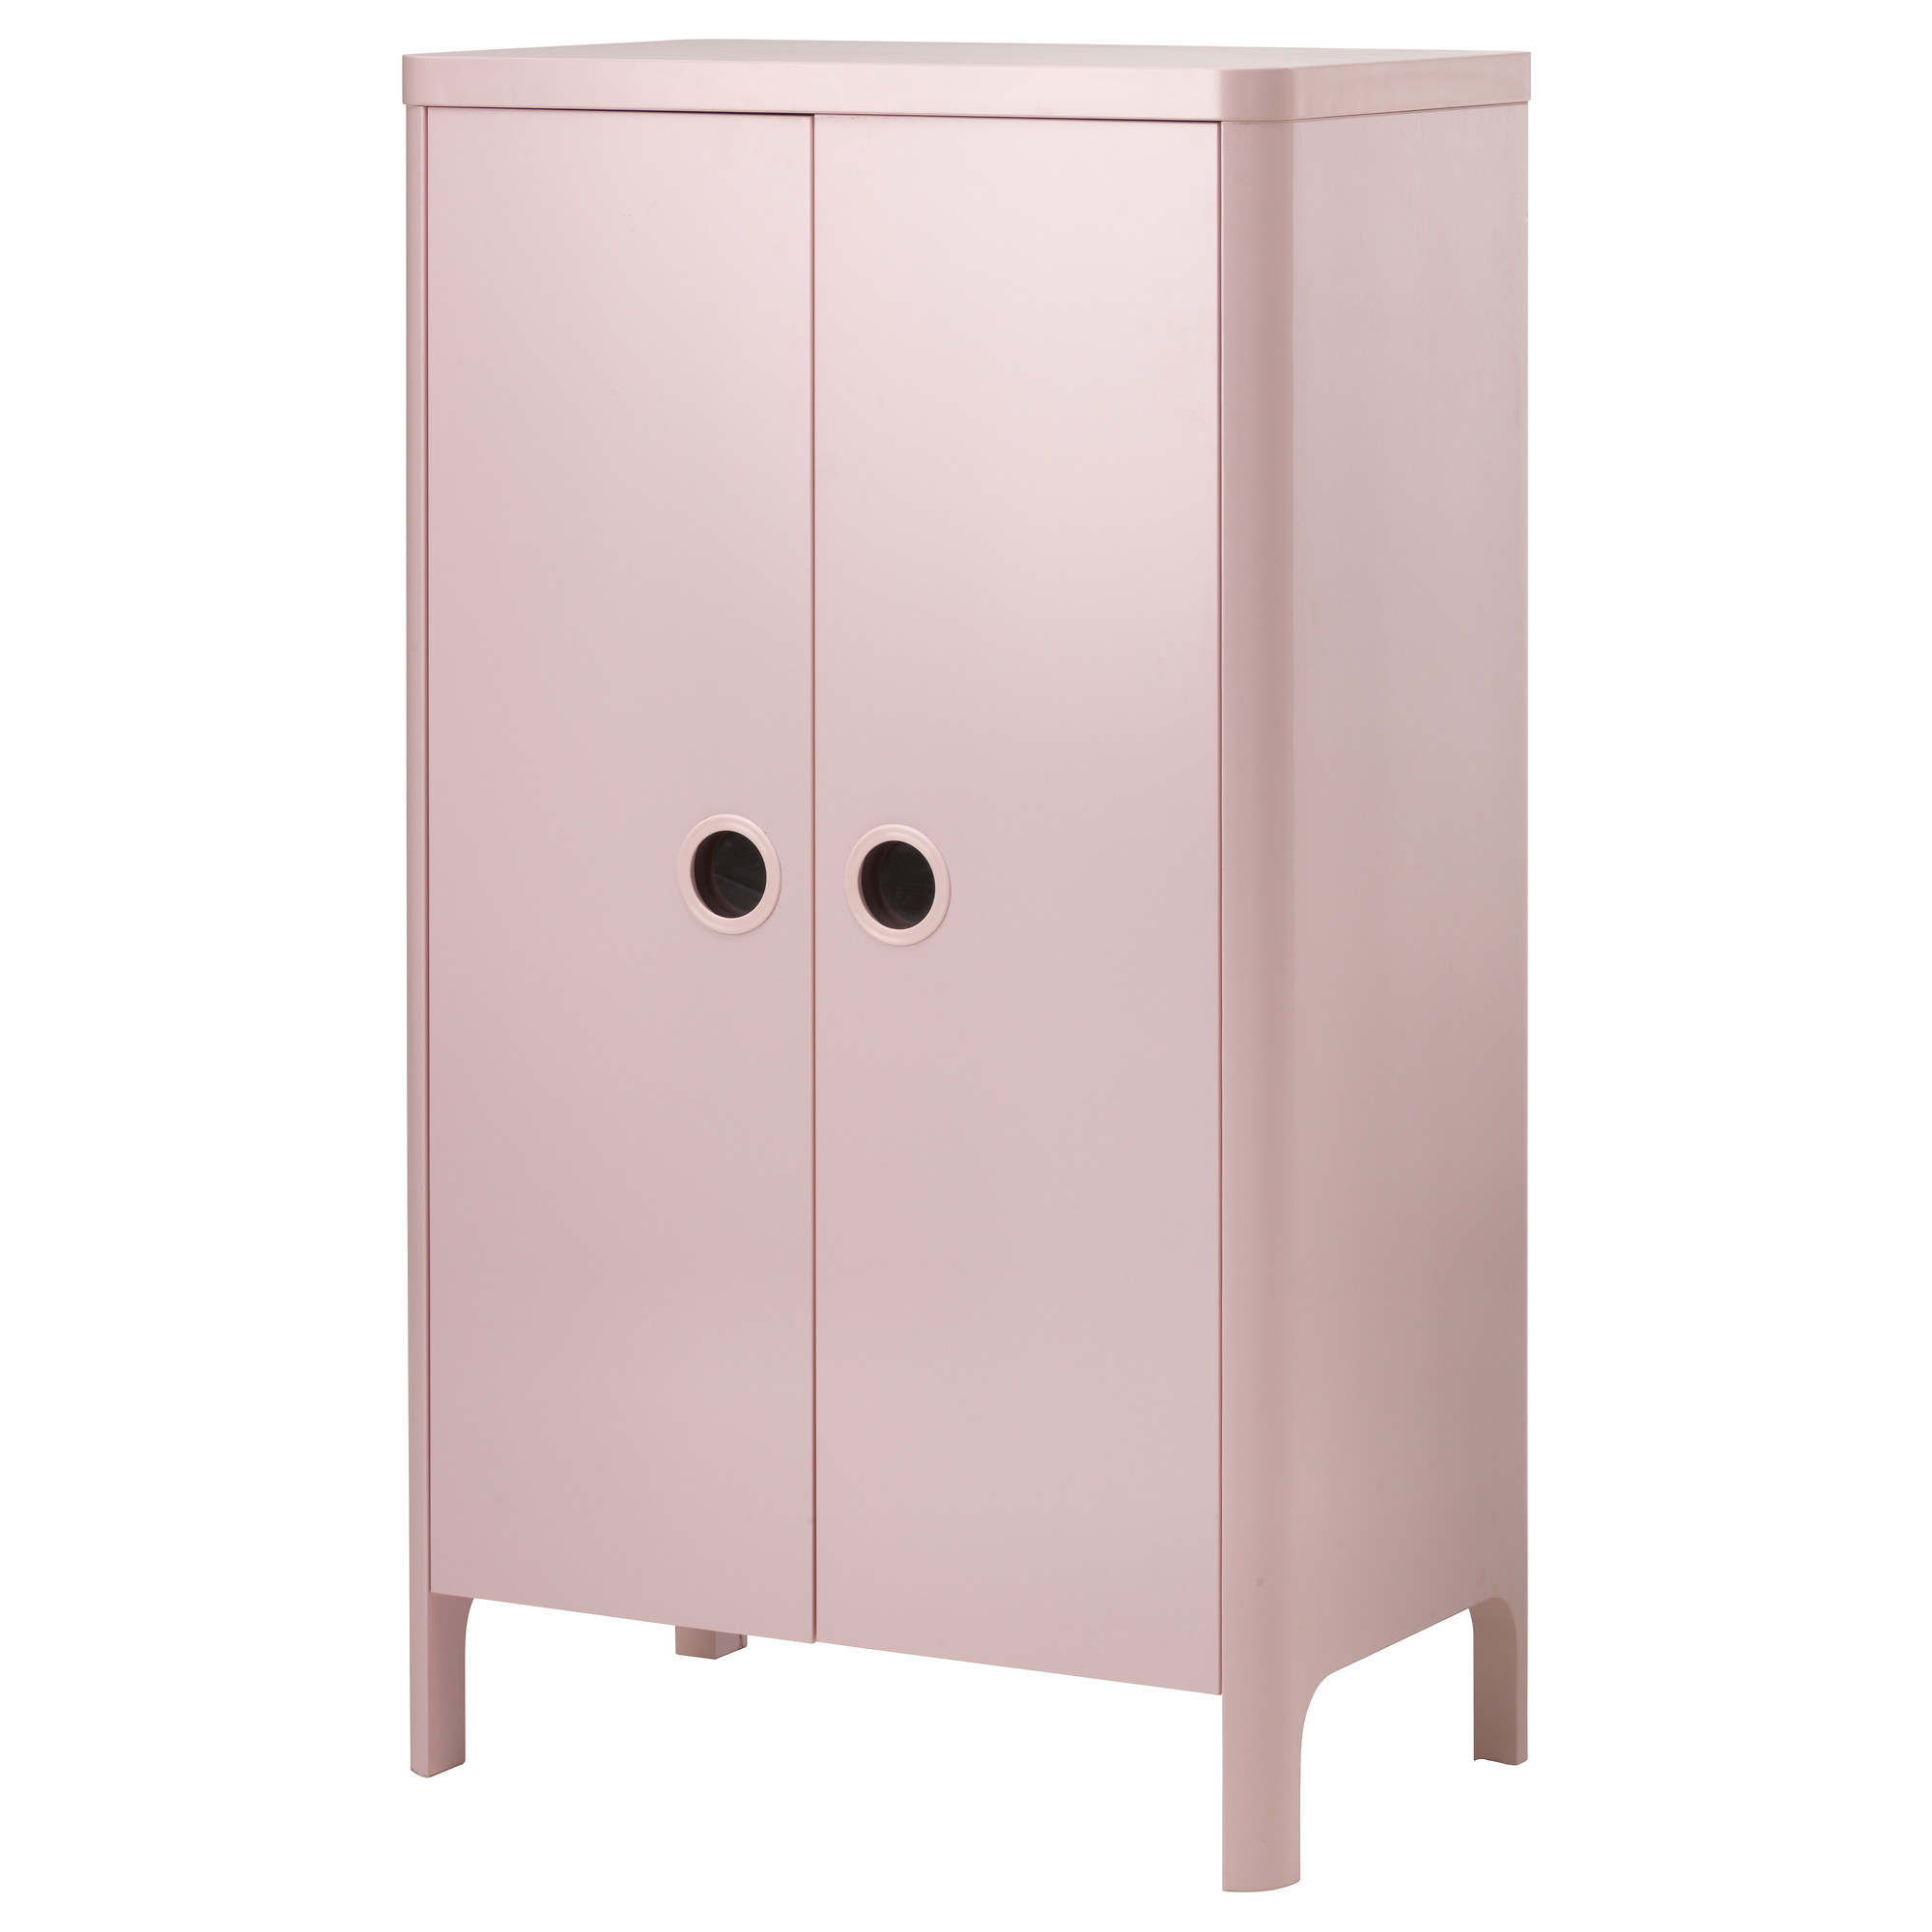 childrens wardrobes ikea busunge wardrobe you can adjust the height of the clothes rail and MOWMYTF